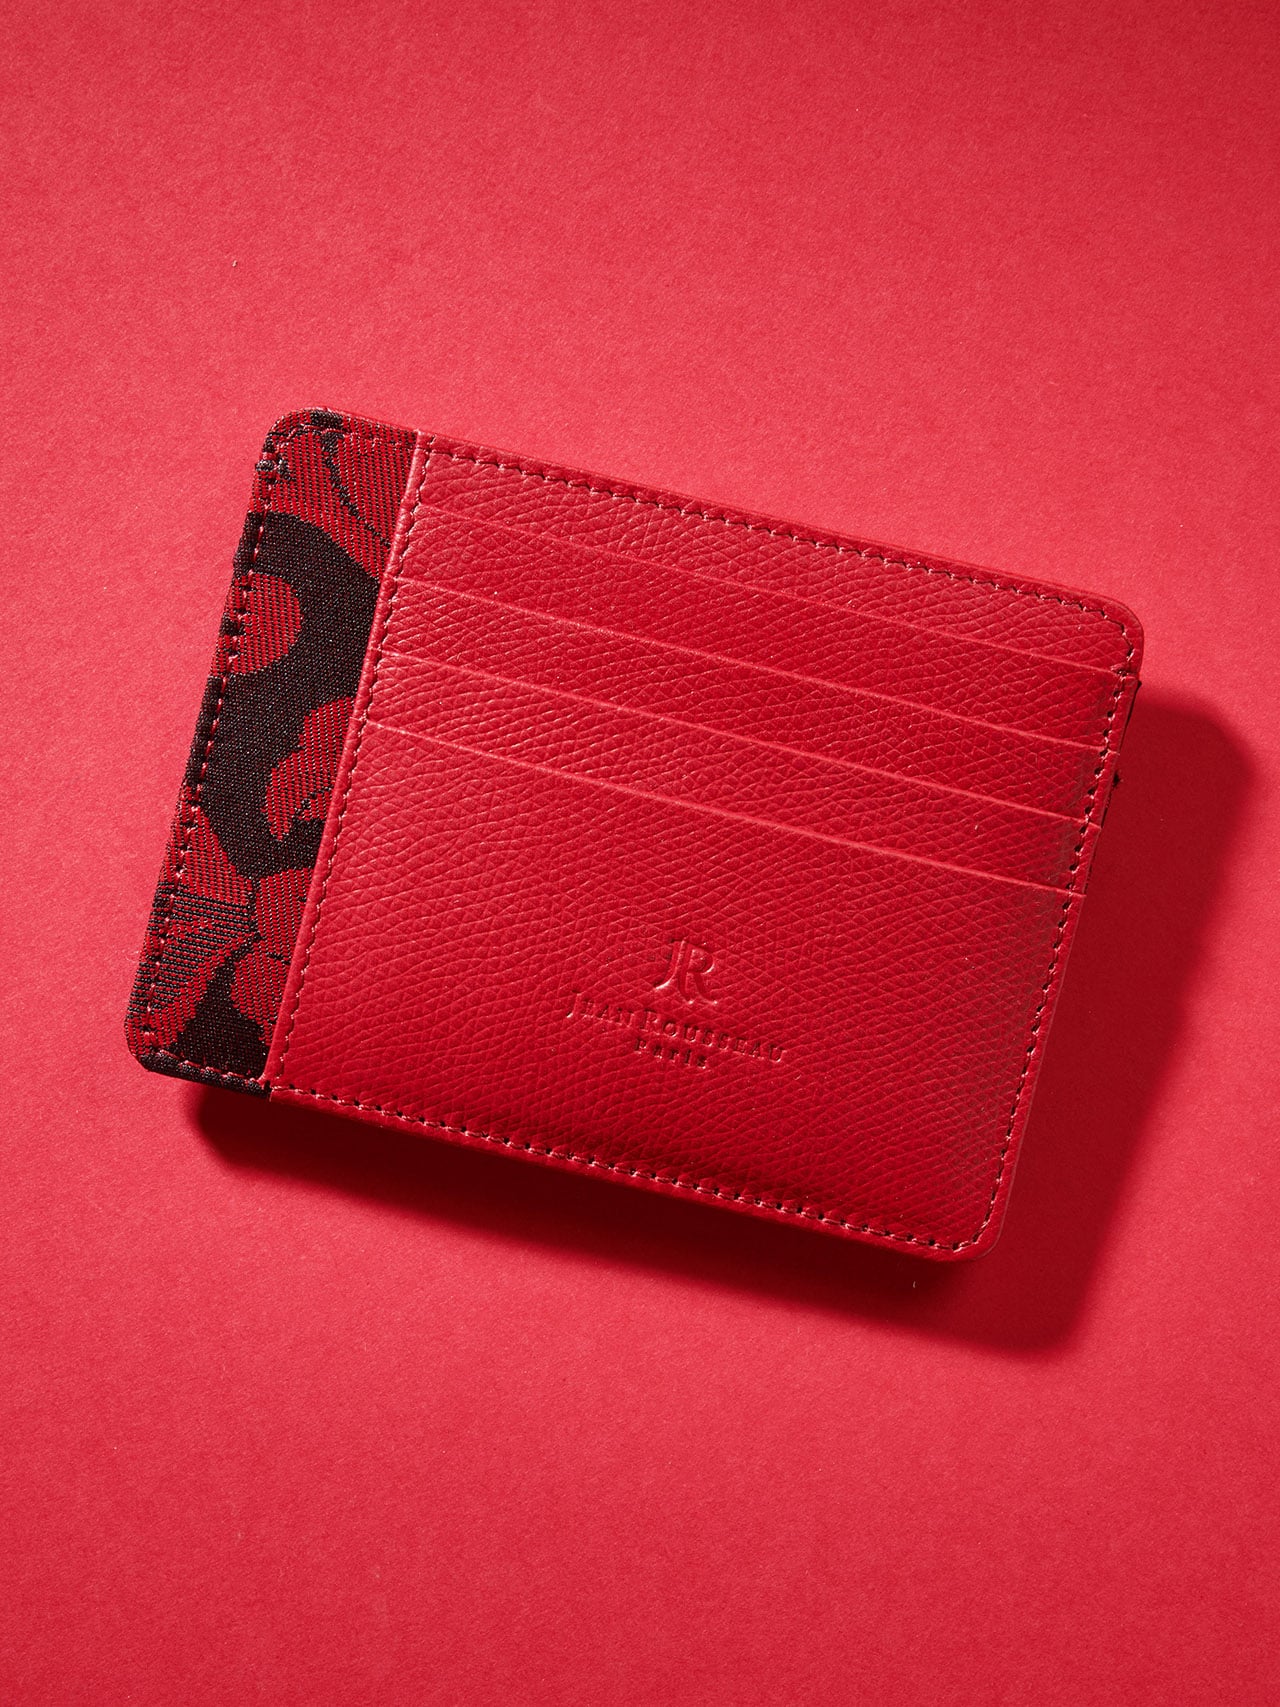 LOUIS VUITTON RED LEATHER CARD HOLDER